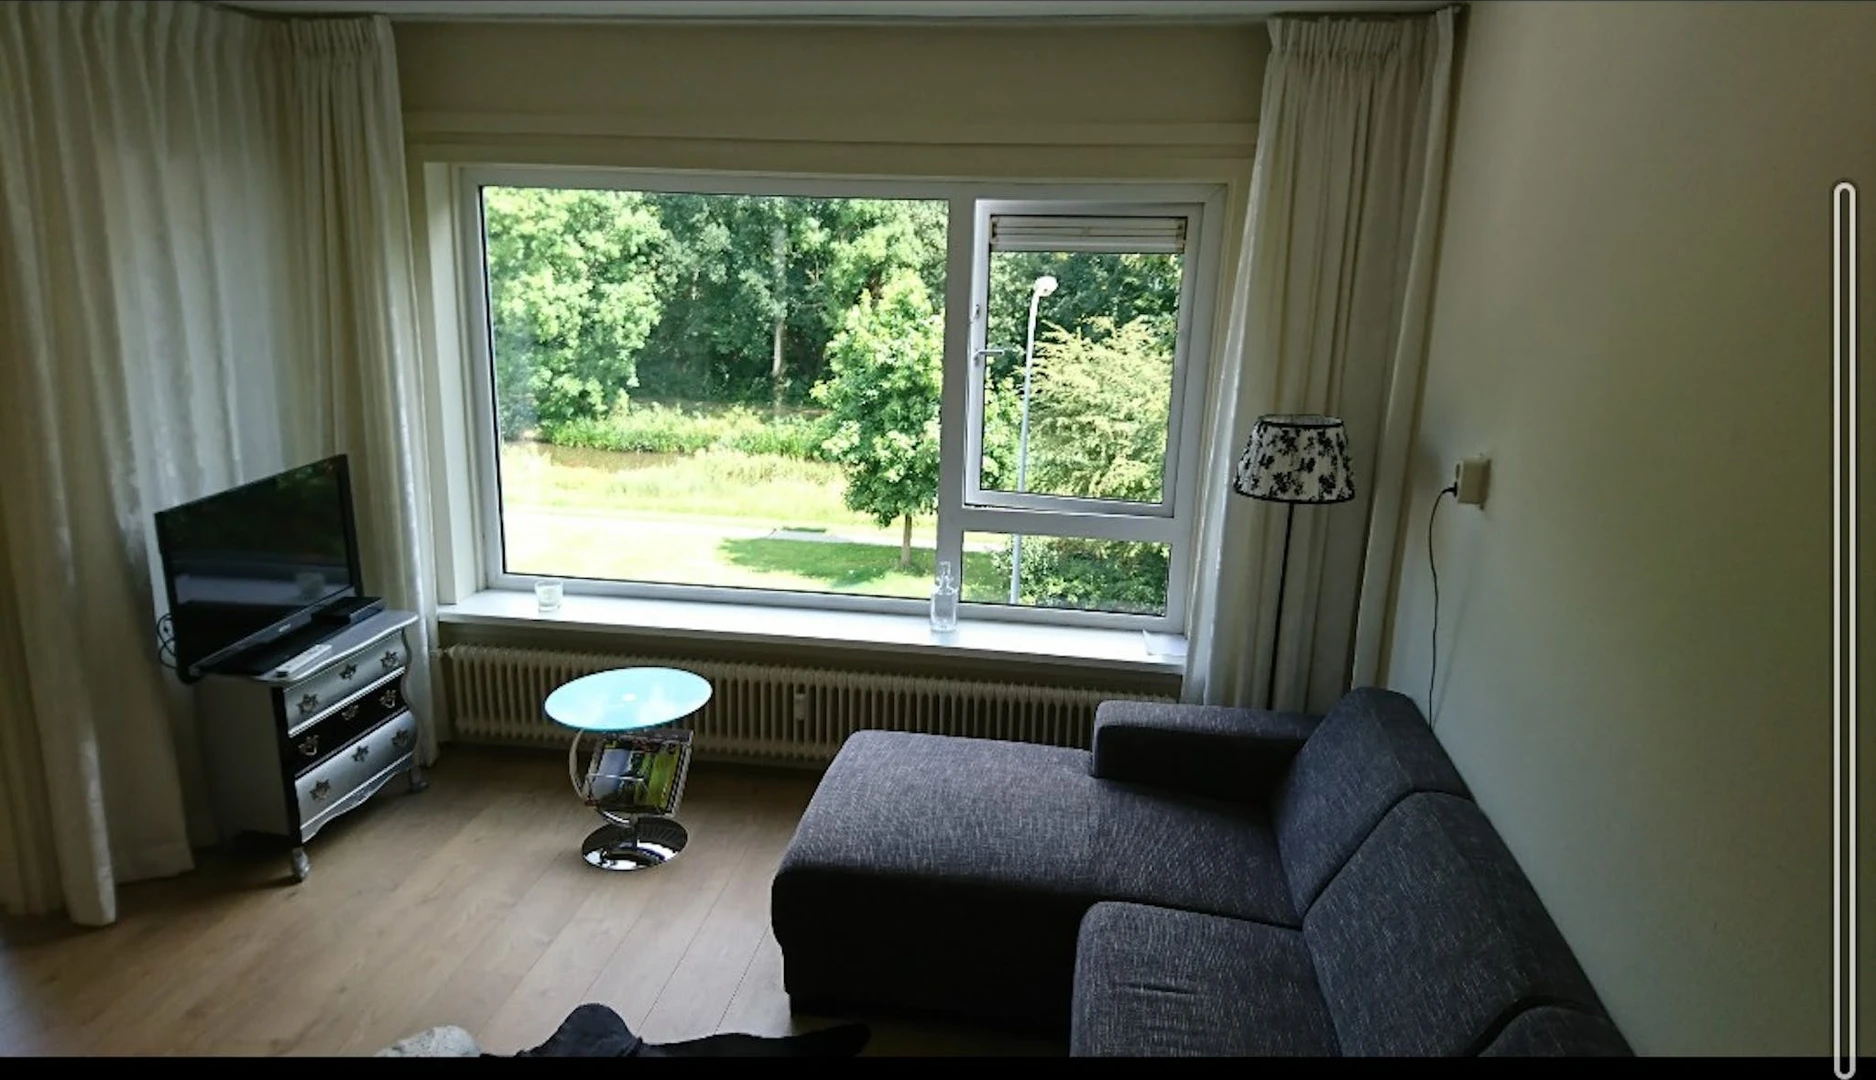 Accommodation in the centre of Groningen